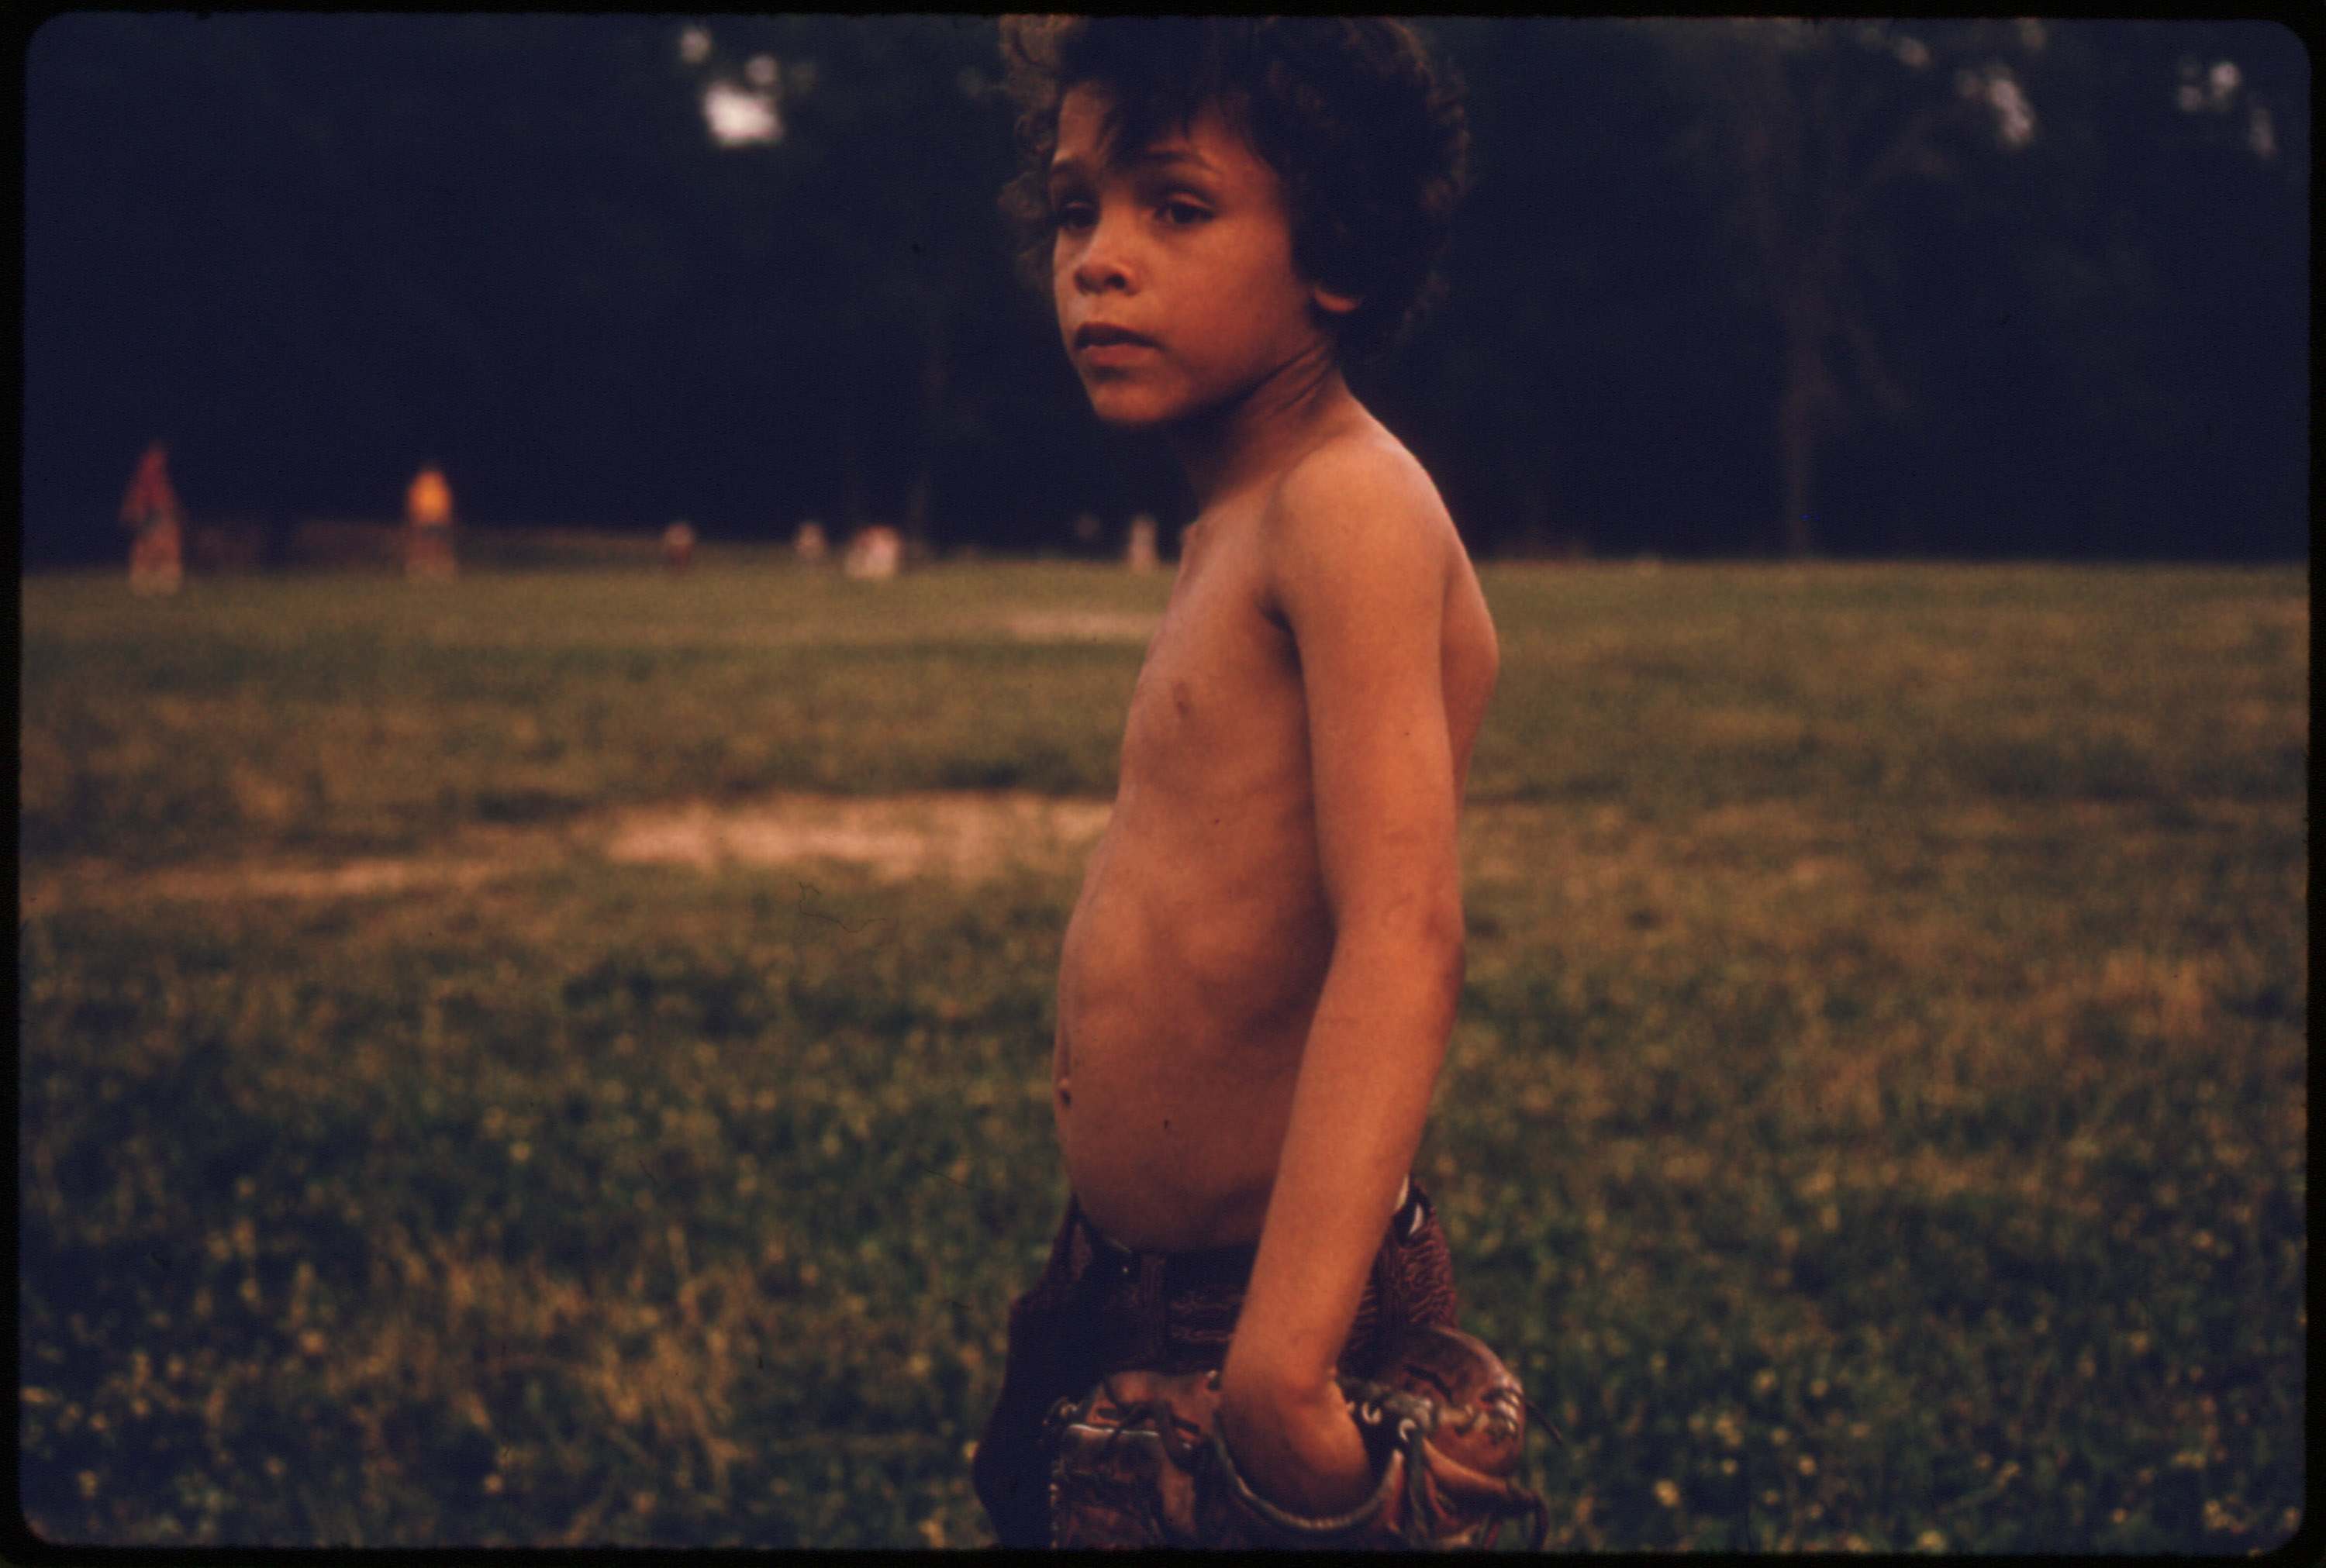 Puerto-Rican boy playing softball in Brooklyn's Hiland Park, July 1974.